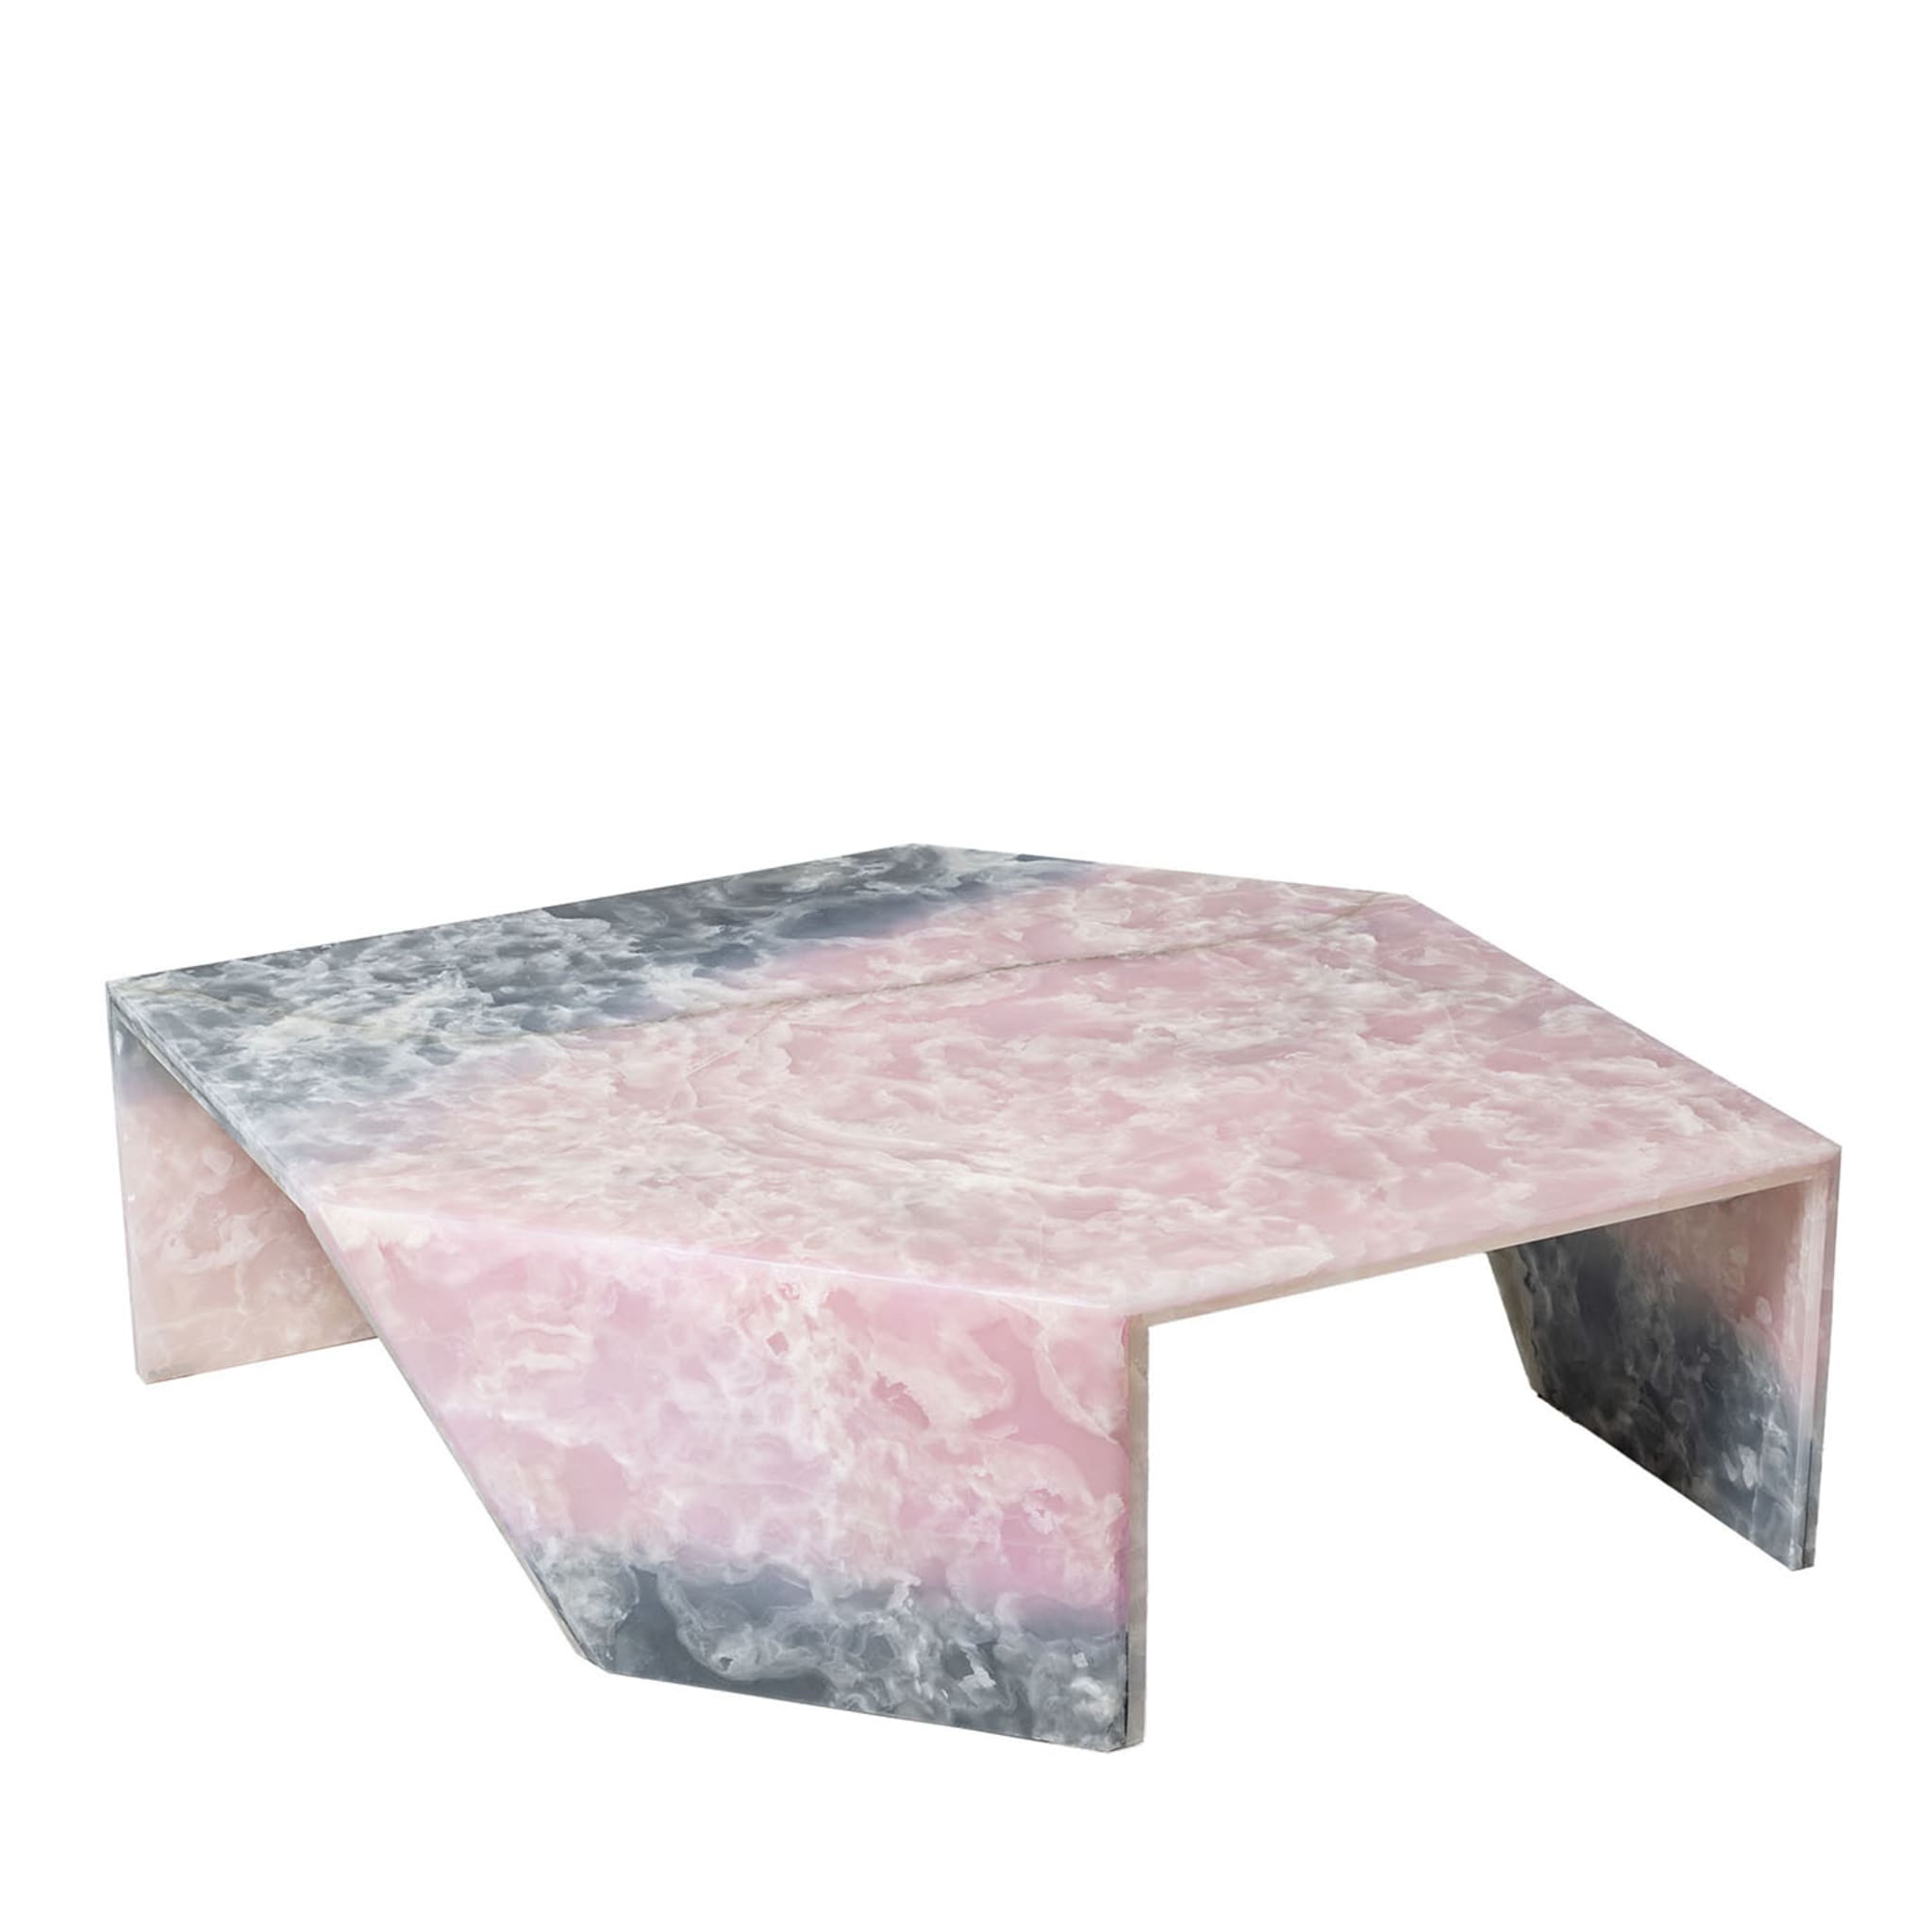 Origami Inciso Pink Coffee Table by Patricia Urquiola - Main view